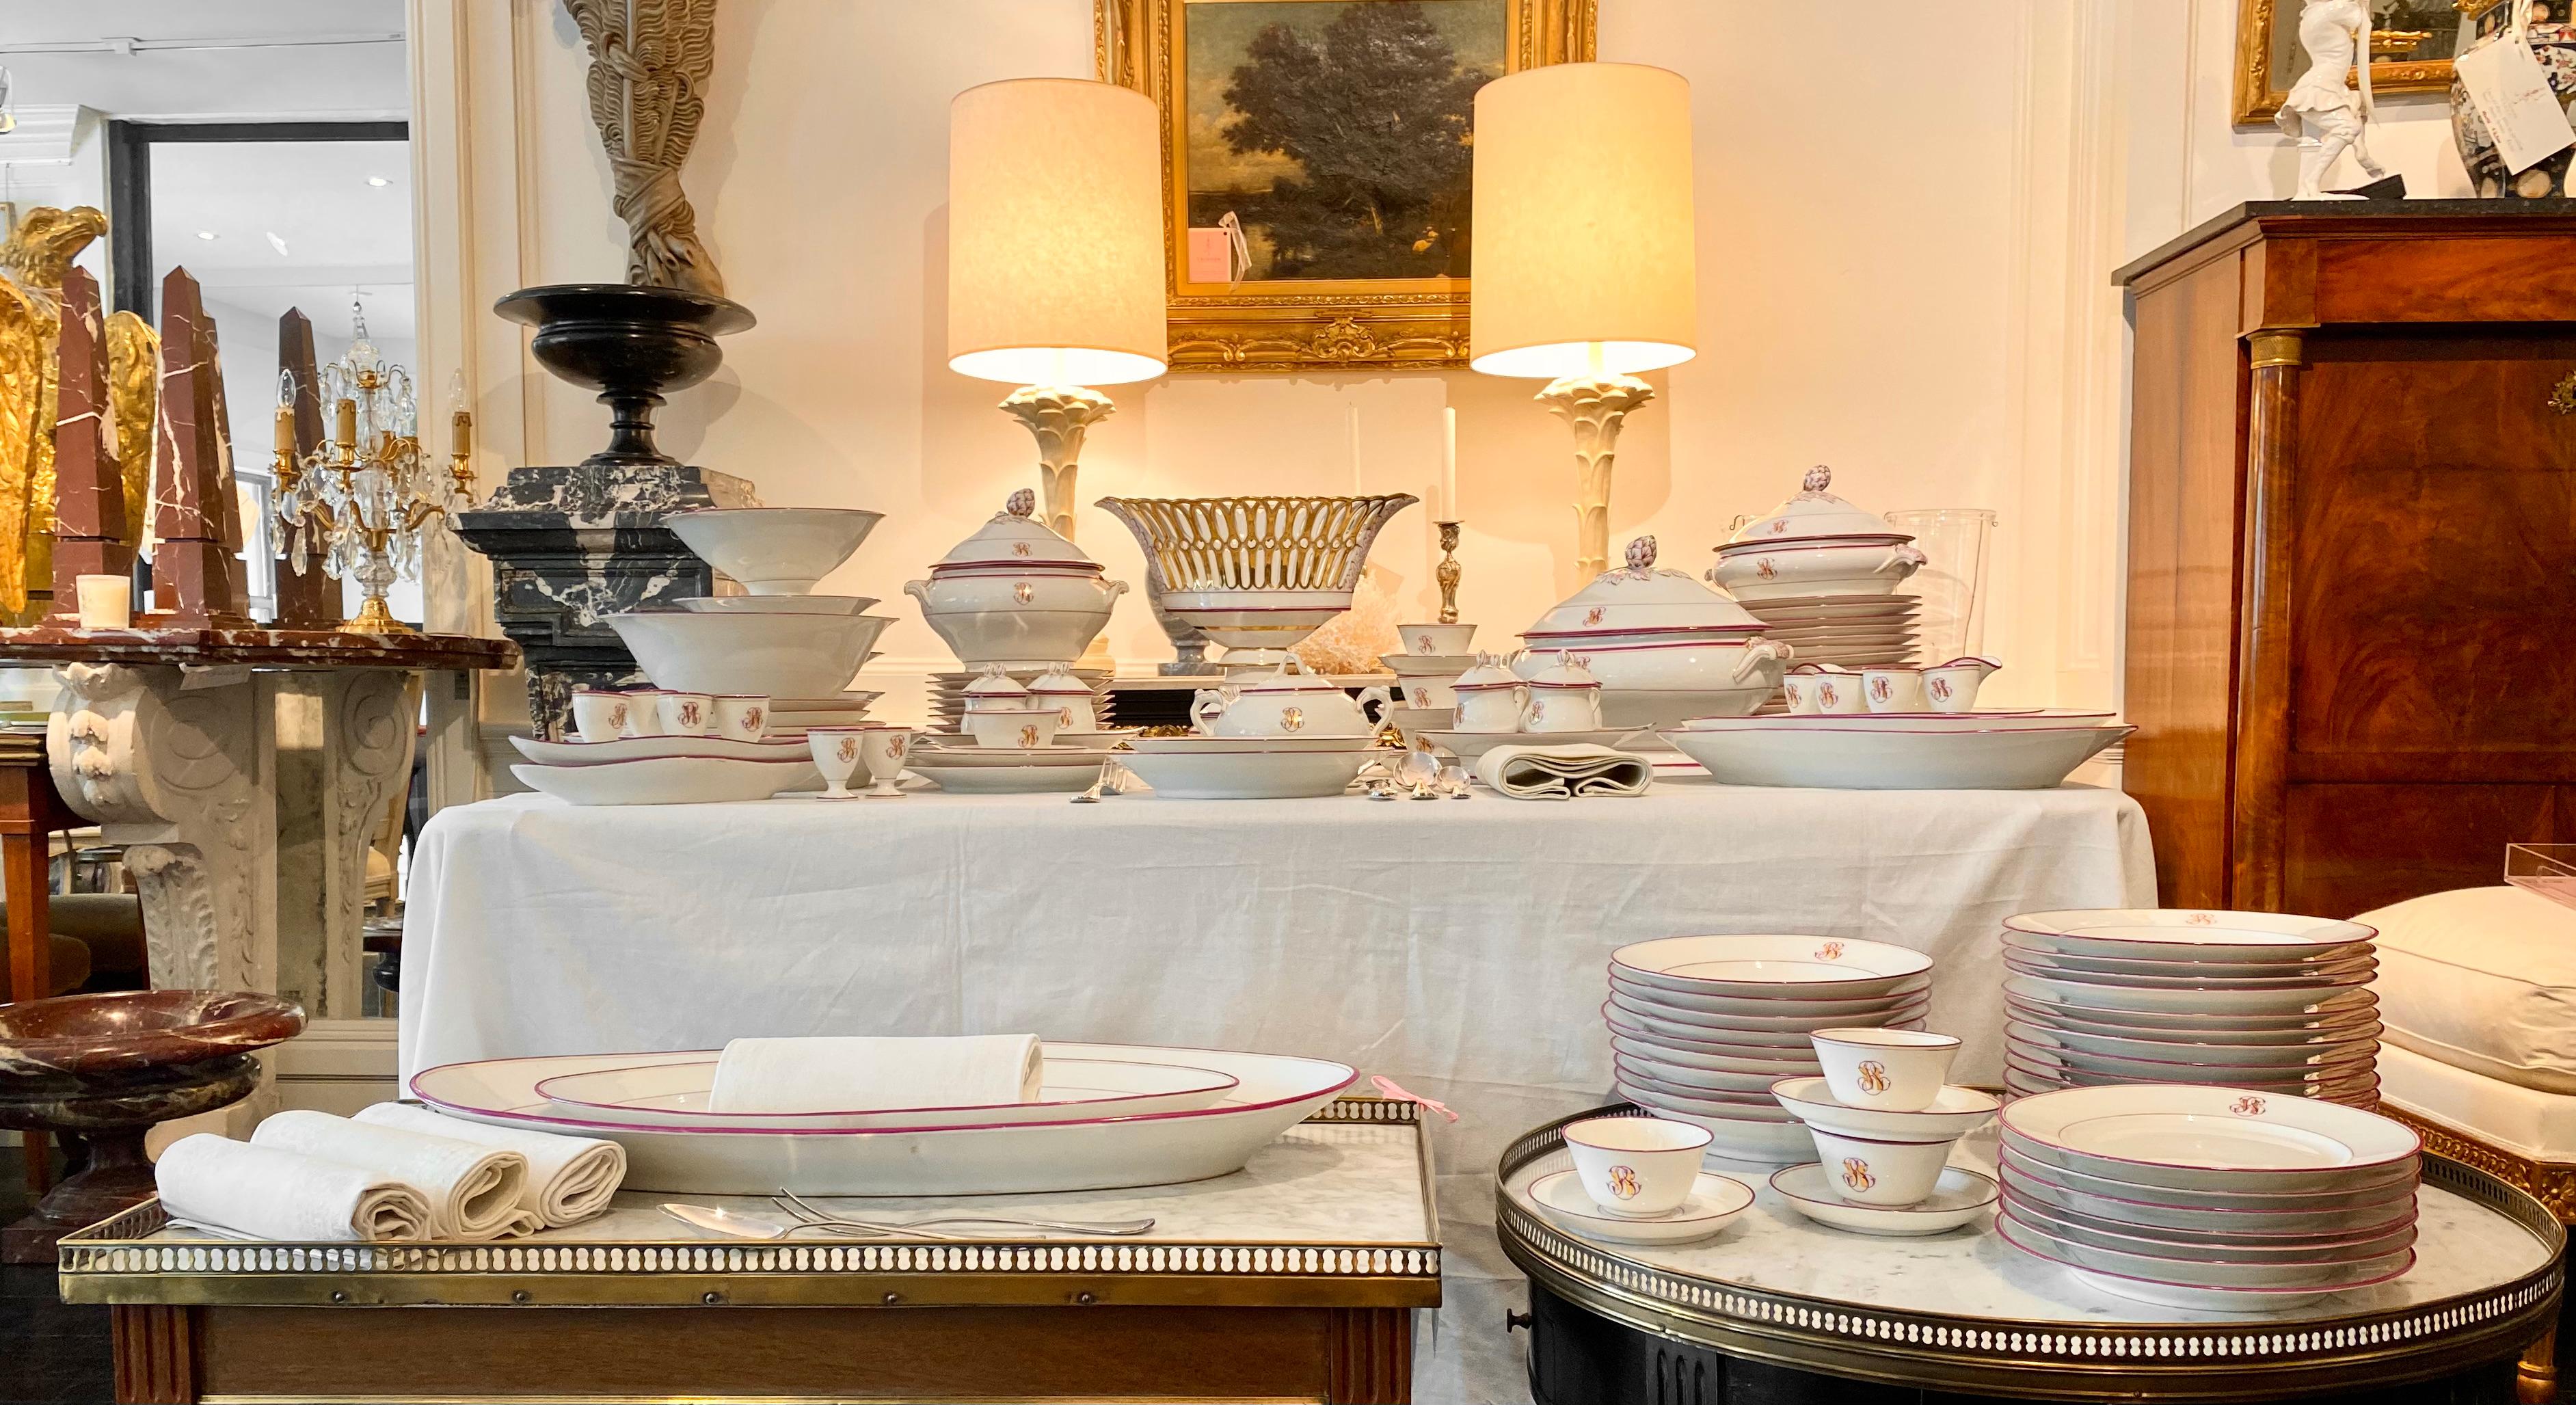 116 Pieces
A magnificent French Antique porcelain 116-piece dinner set, 19th century, with burgundy and gold accents. 
This set is exceptionnal both in its beauty, its state of conservation, and the extraordinary range of pieces and serving